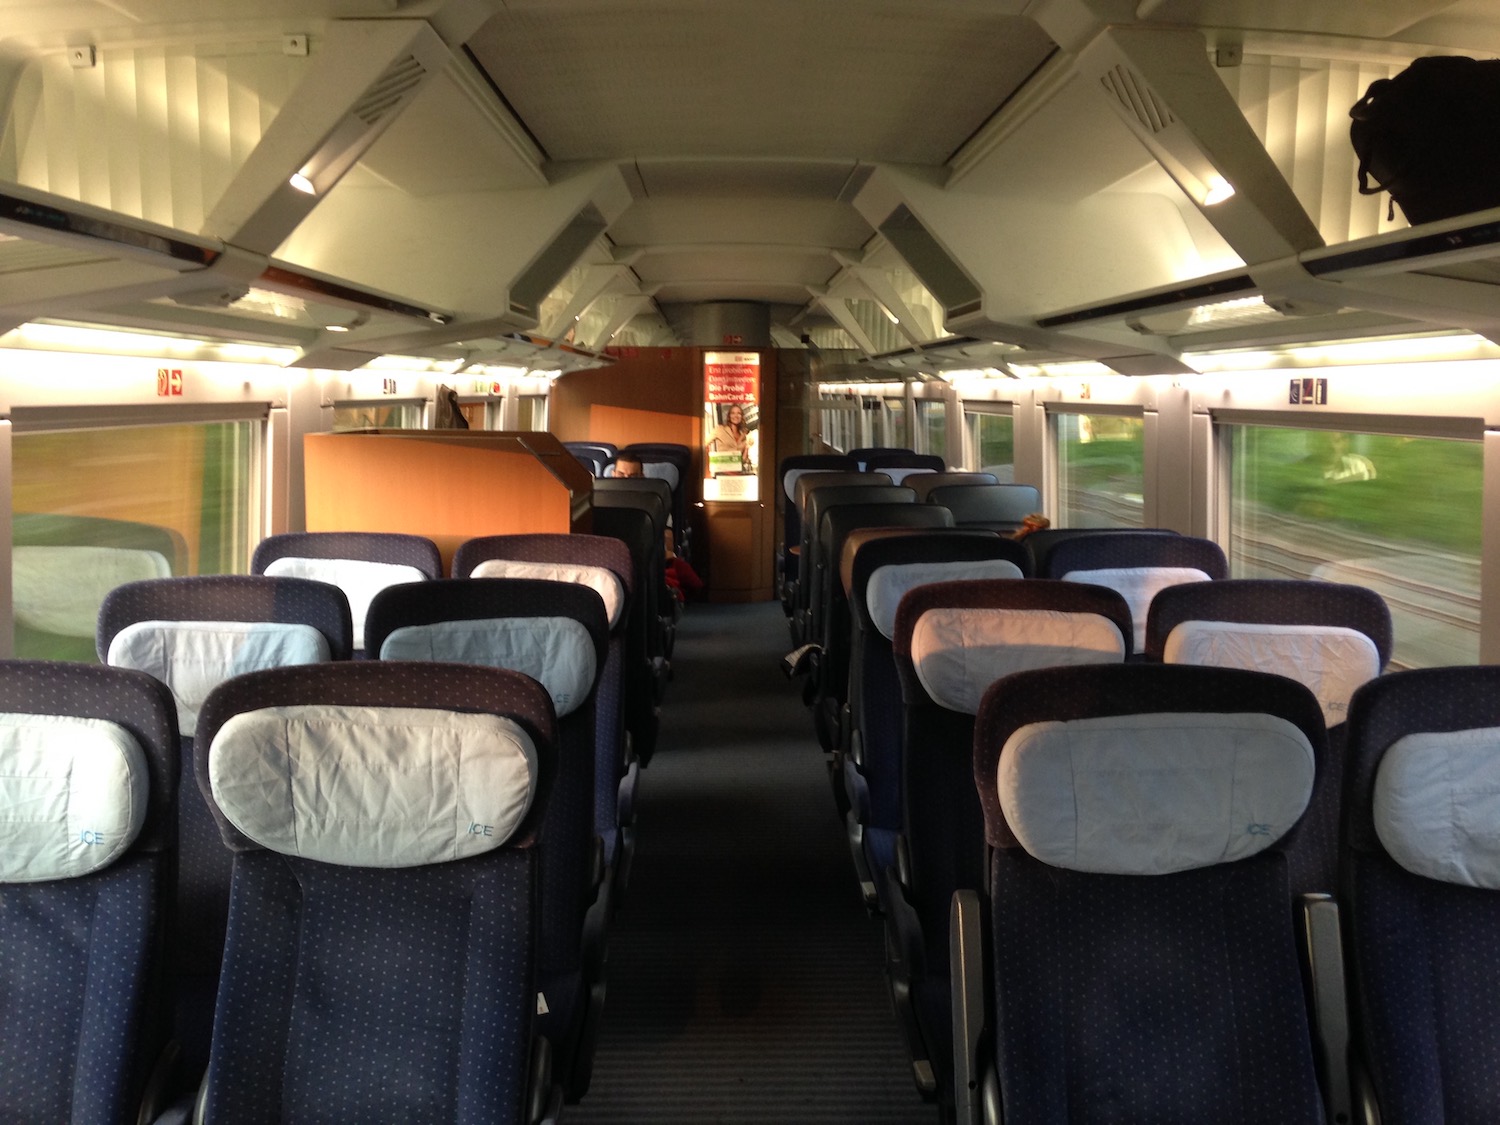 a train with seats and windows